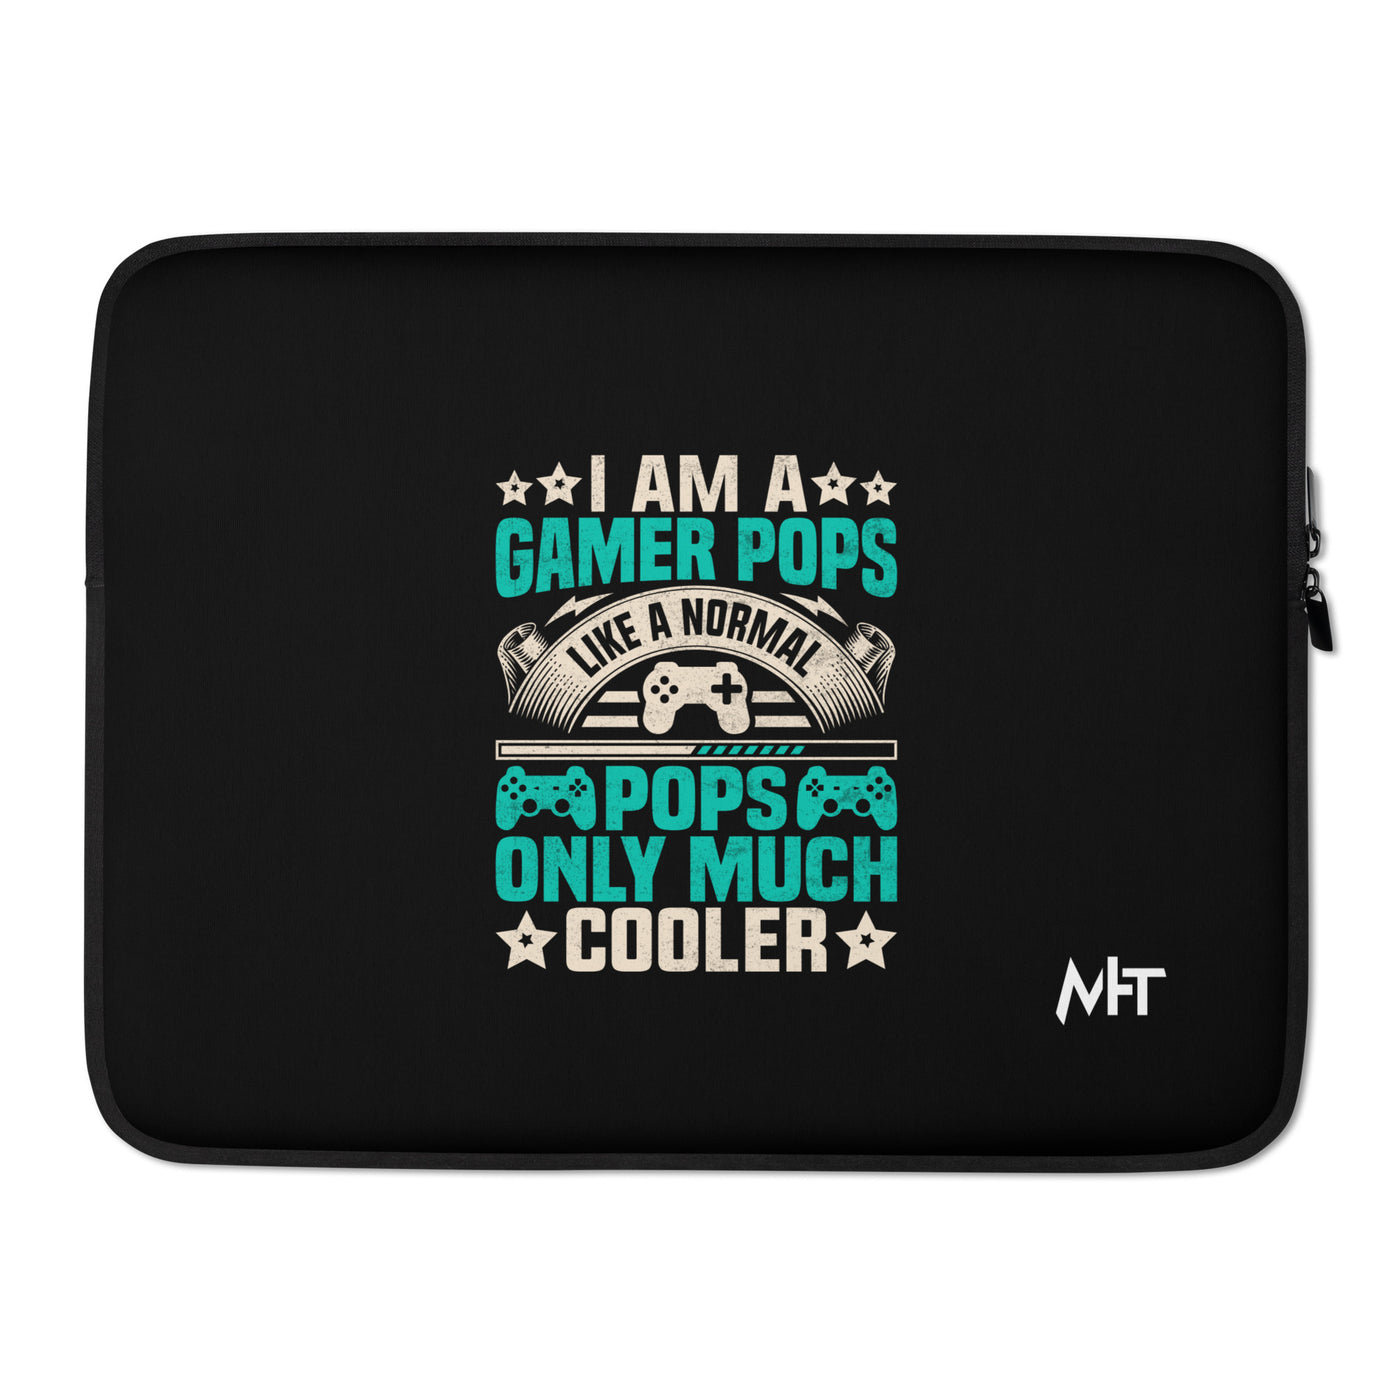 I am a Gamer Pops, like a normal Pops only much cooler - Laptop Sleeve